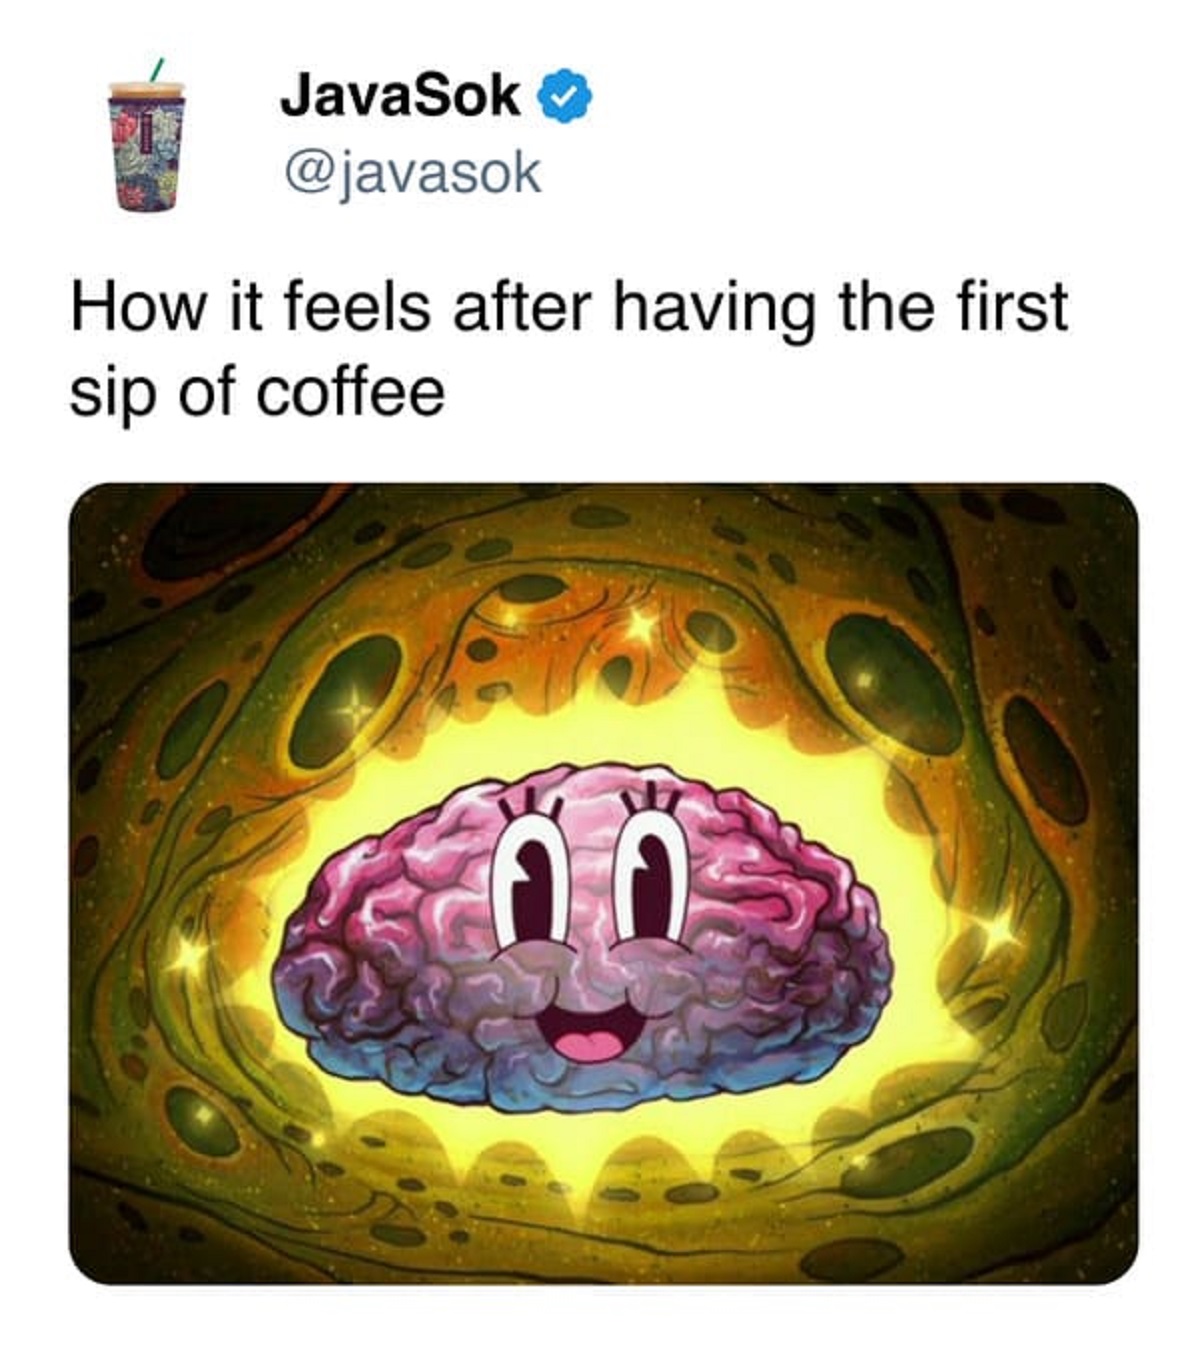 jaw - JavaSok How it feels after having the first sip of coffee Qc